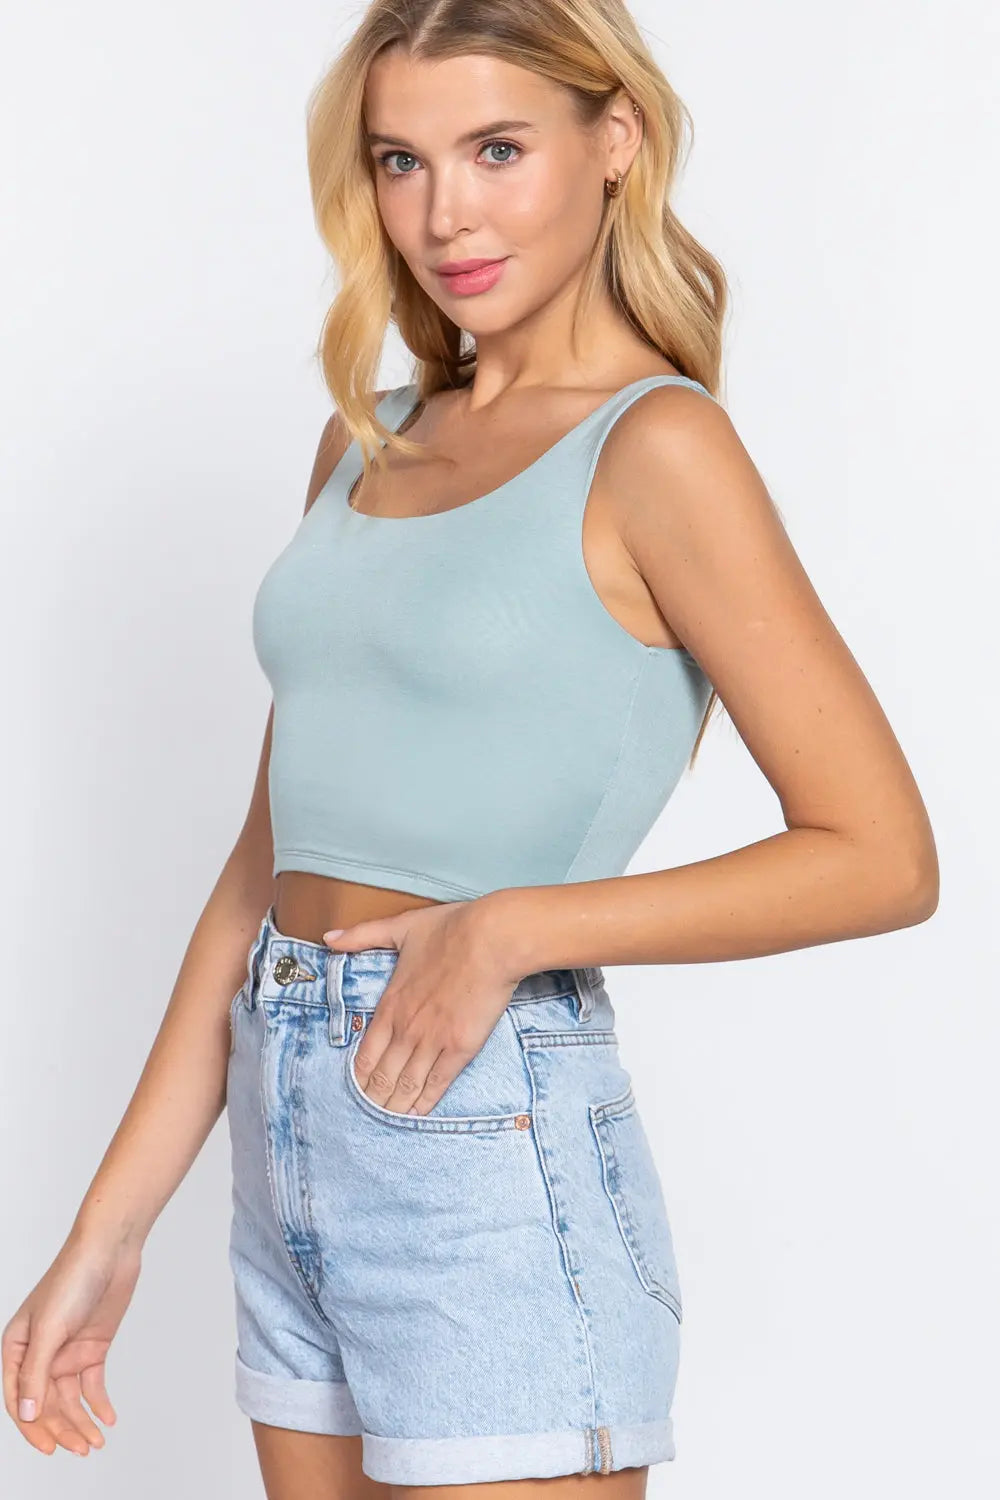 Scoop Neck 2 Ply Crop Tank Top Sunny EvE Fashion